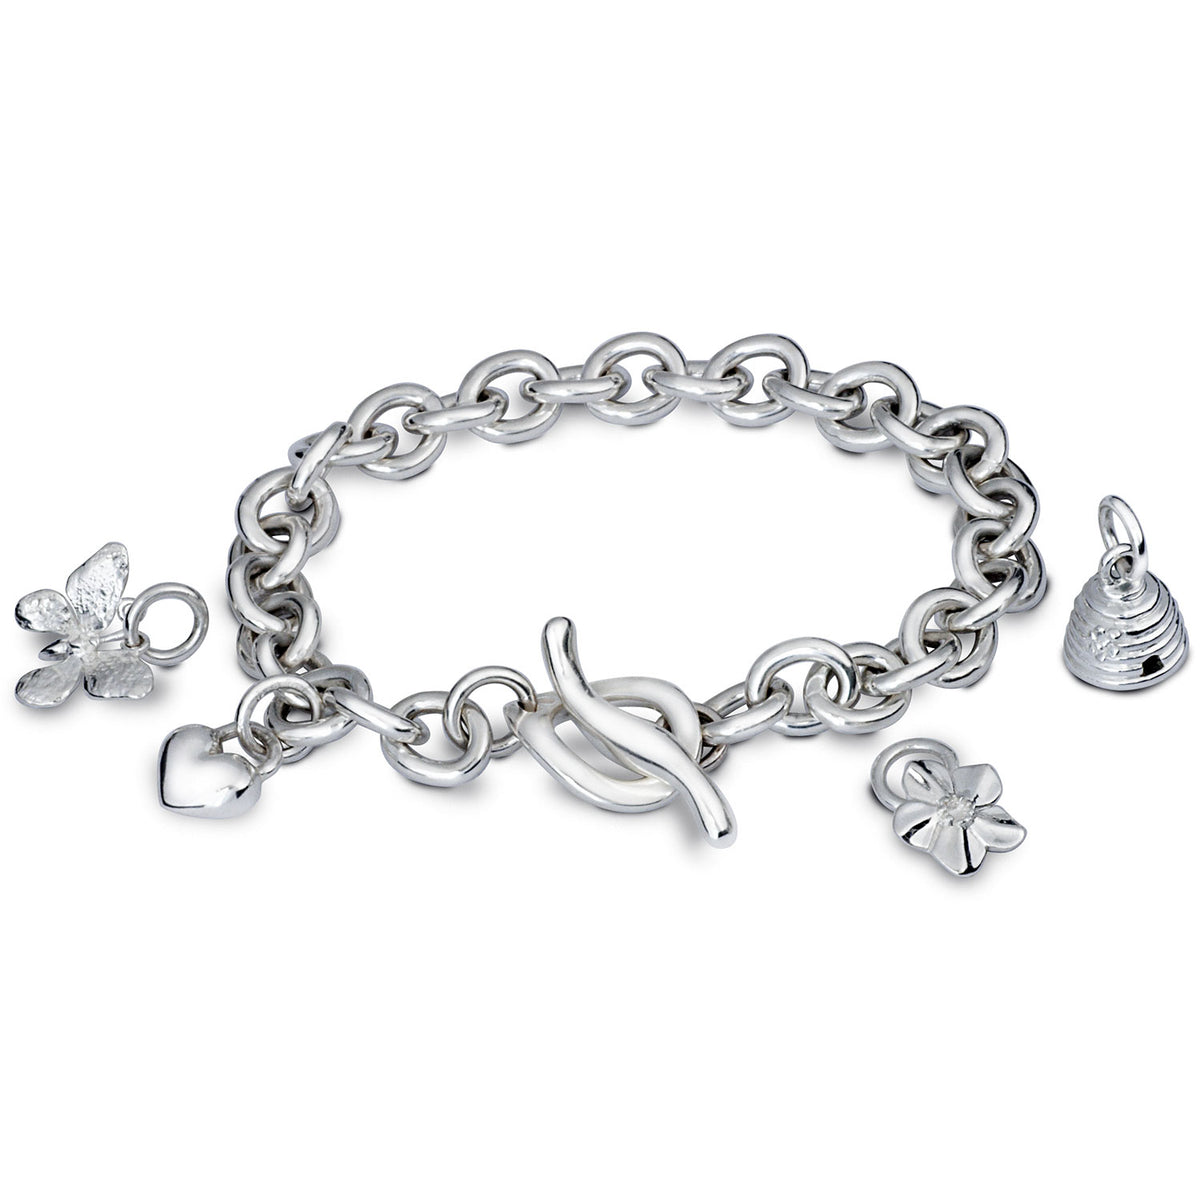 Traditional style designer silver charm bracelet with T-bar clasp Scarlett Jewellery